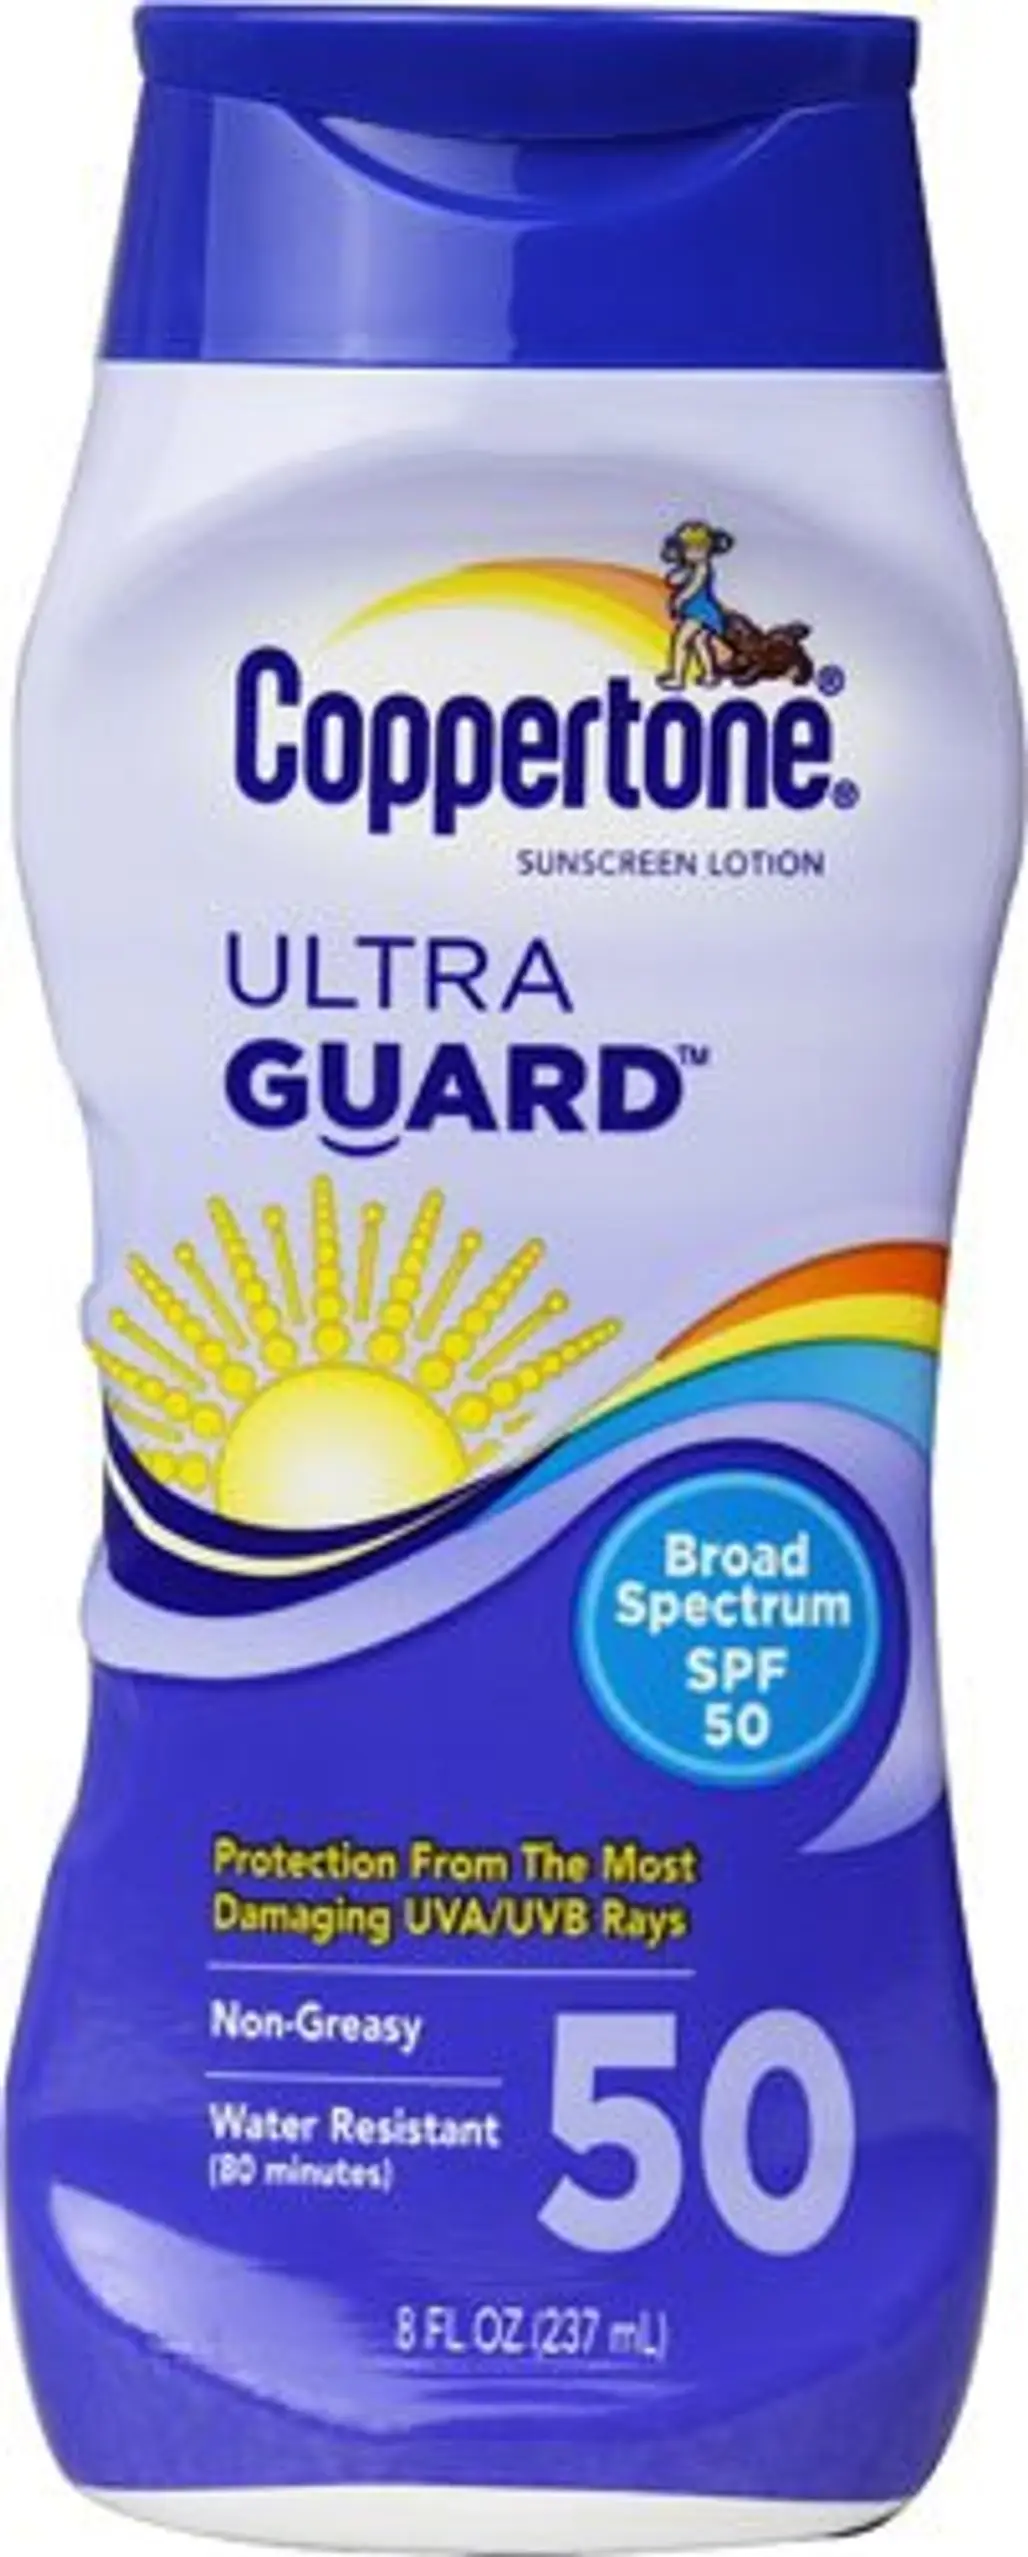 Protect Your Skin with Coppertone Ultra Guard Broad Spectrum Sunscreen